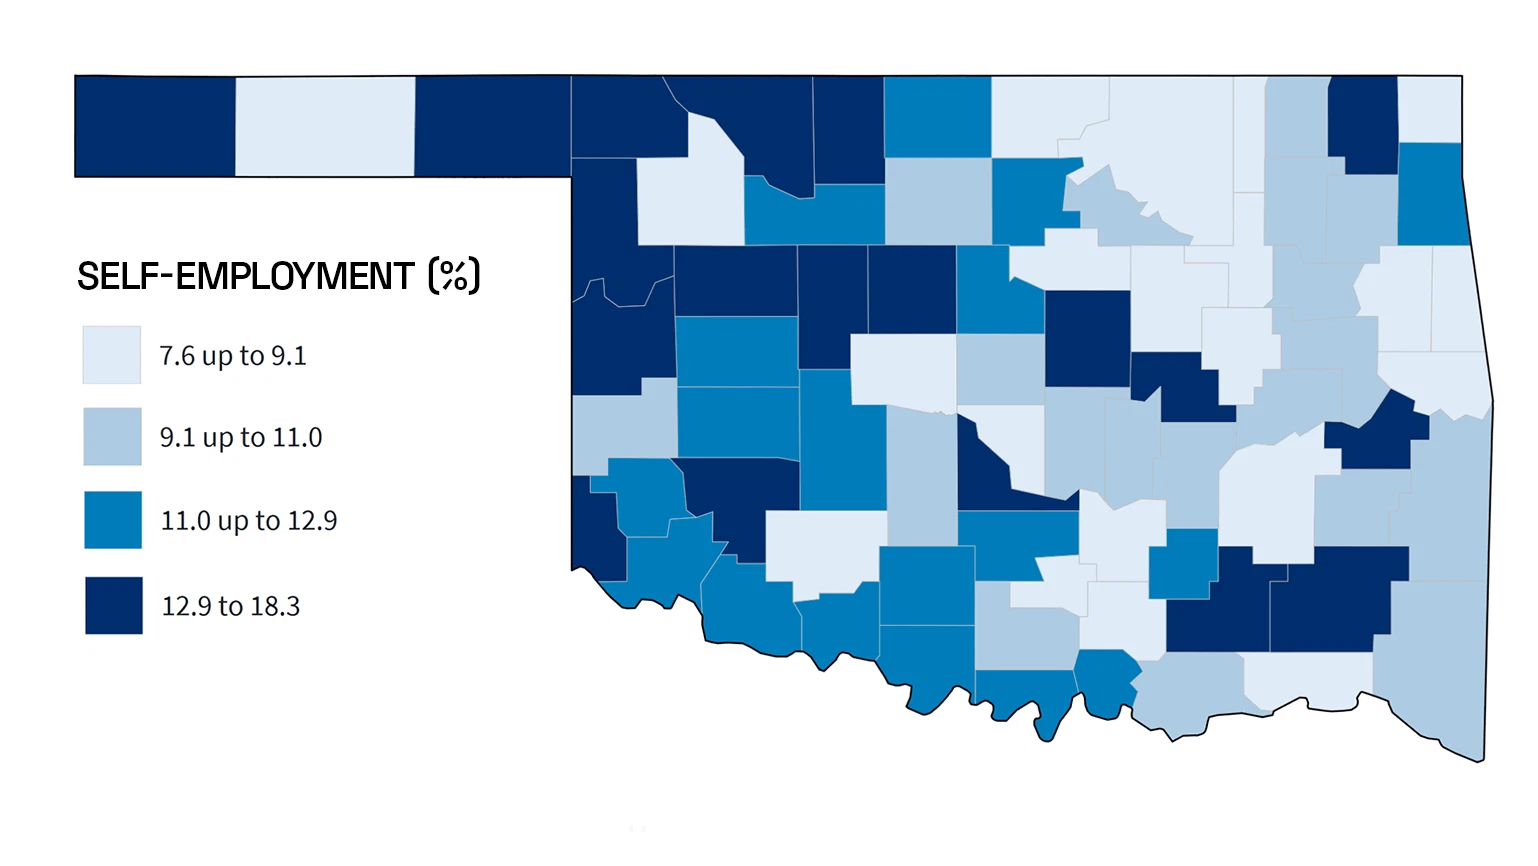 Oklahoma Self-Employment by County in 2018